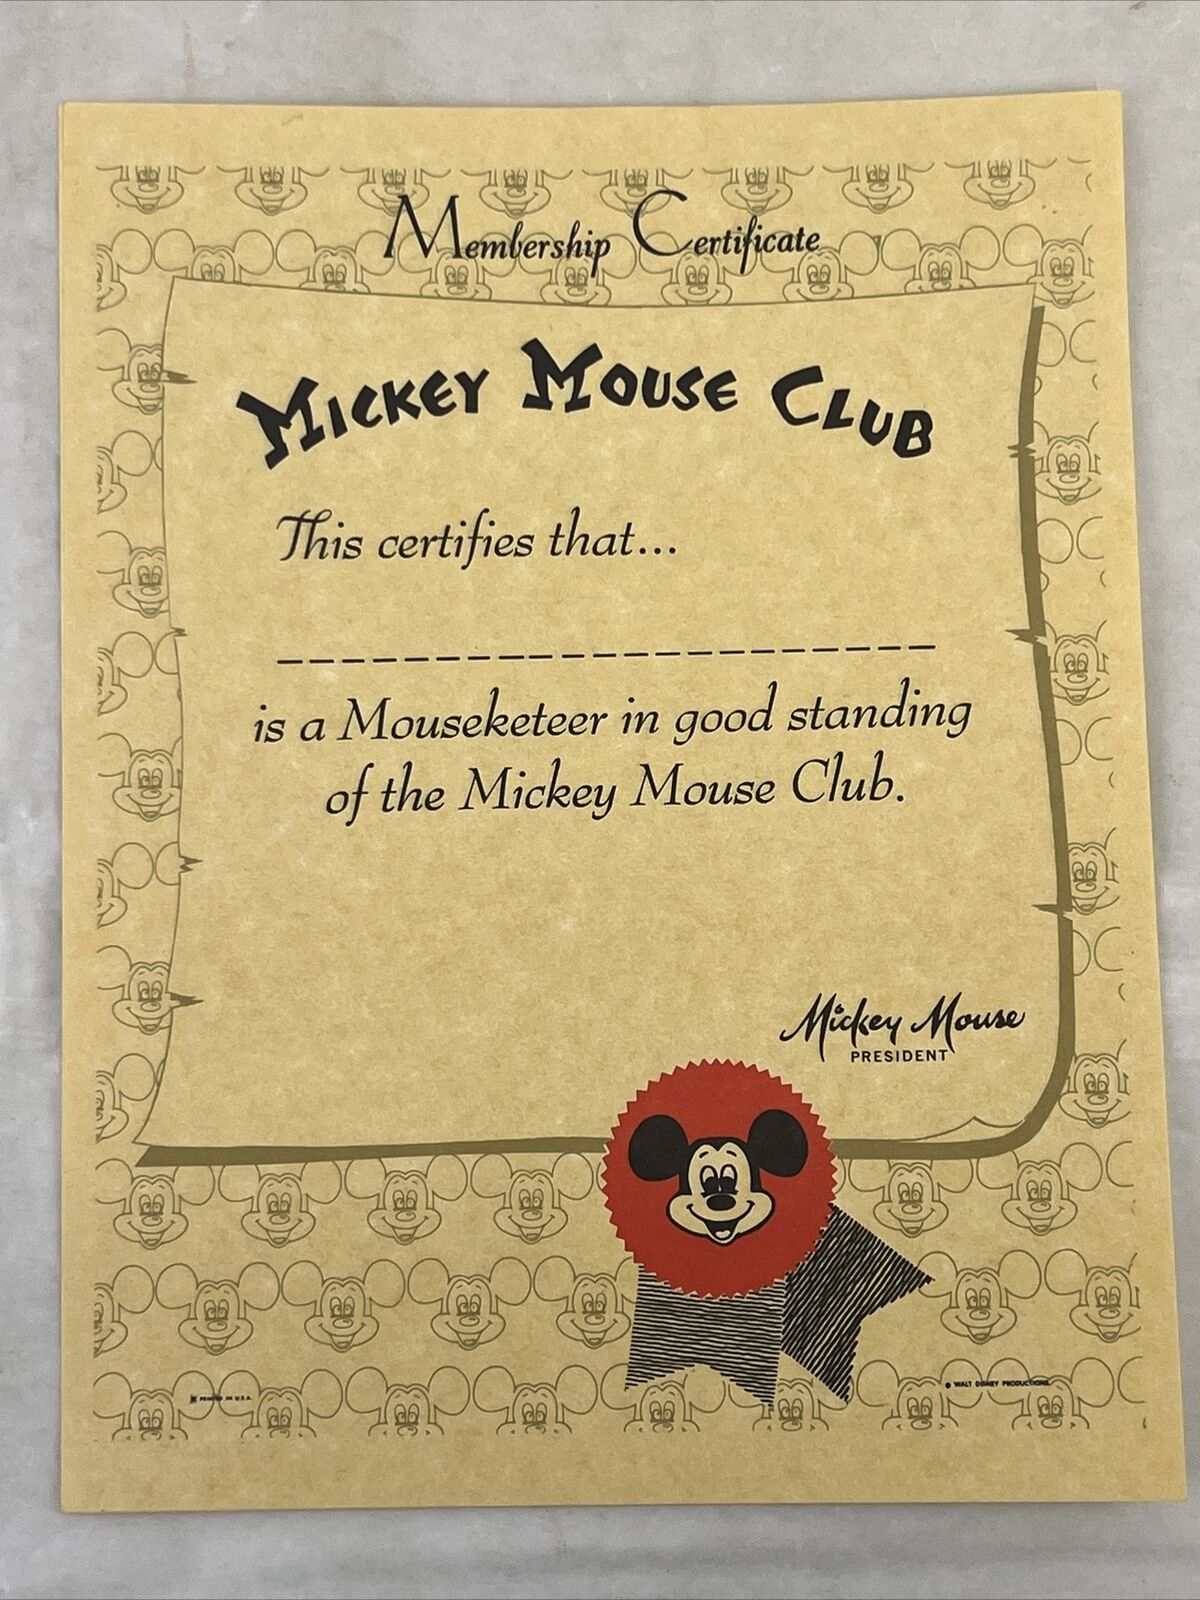 1970s VINTAGE DISNEY MICKEY MOUSE CLUB HONORARY MOUSEKETEER CERTIFICATE